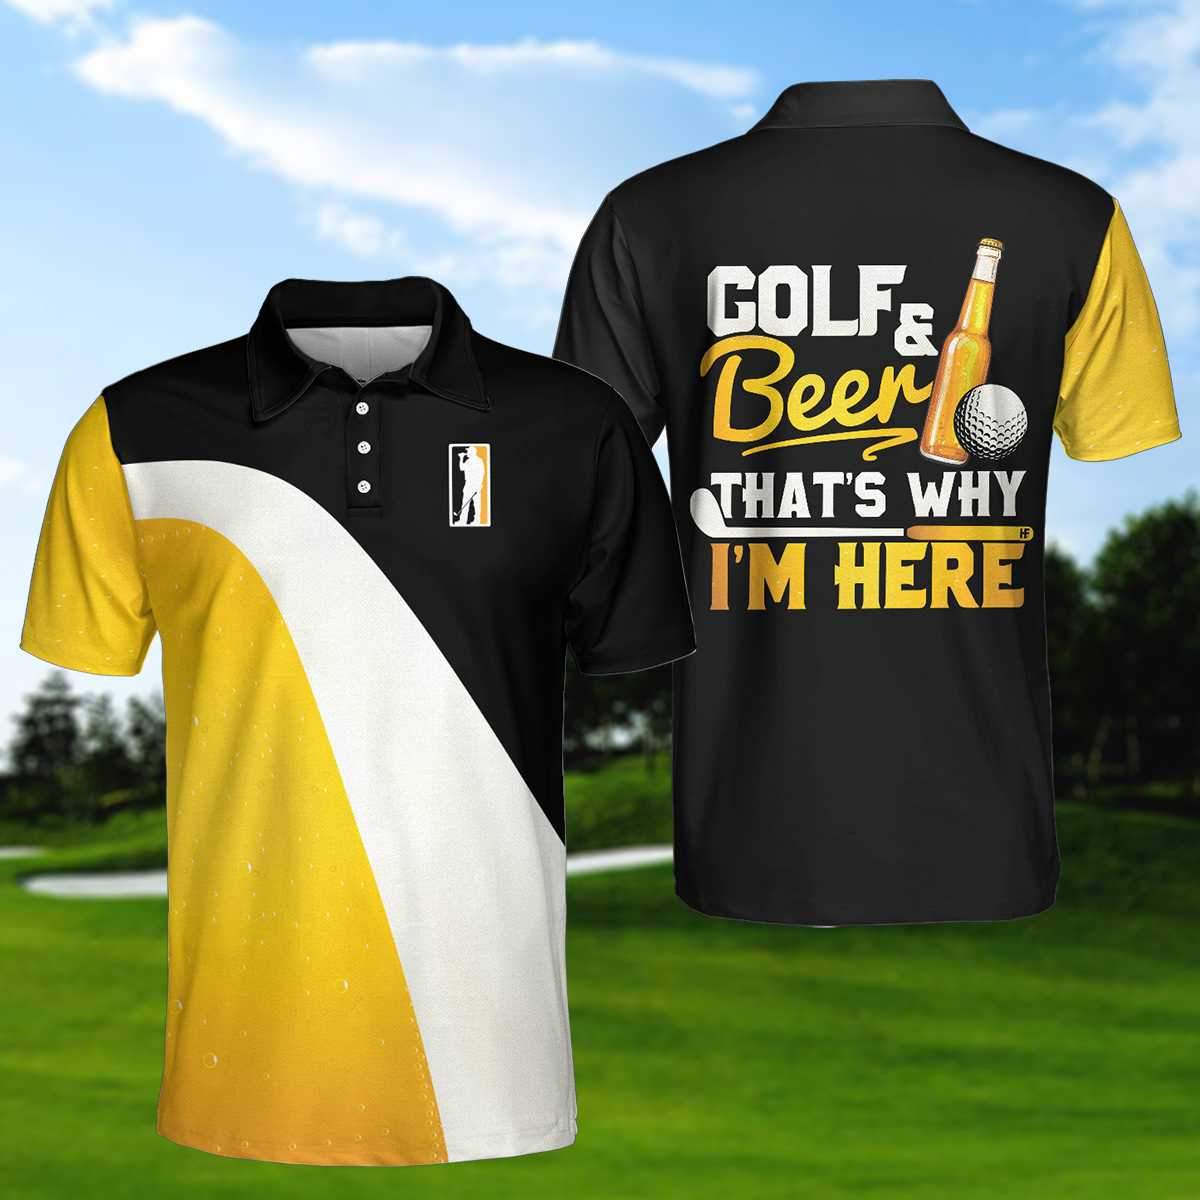 im here for golf and beer short sleeve polo shirt gp436 3nans